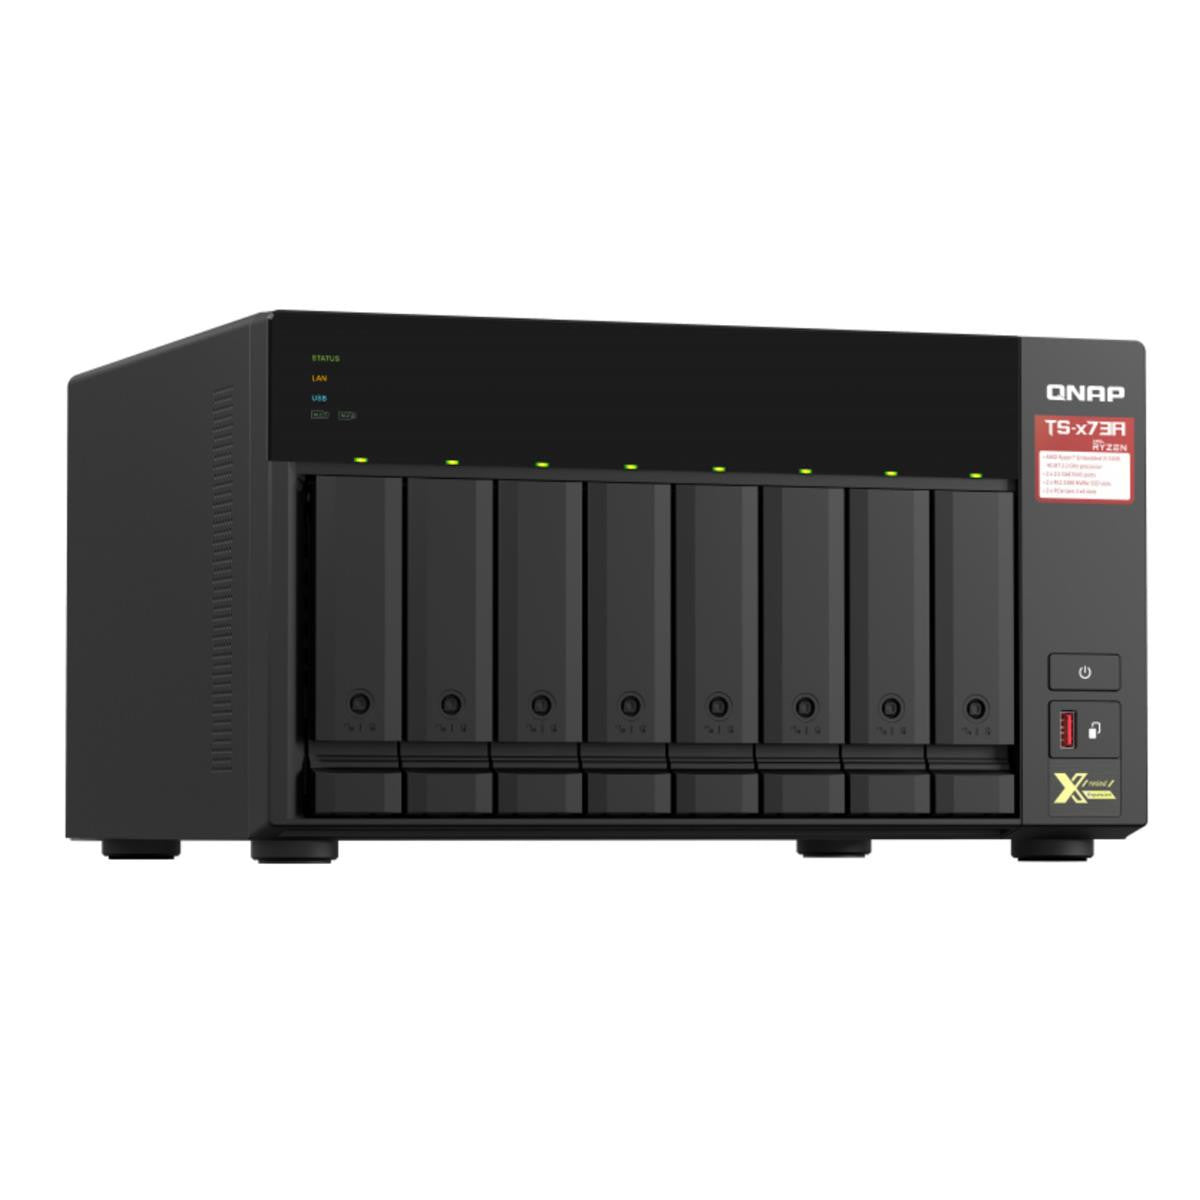 QNAP TS-873A 8-BAY NAS with 64GB DDR4 RAM and 48TB (8x6TB) Seagate Ironwolf NAS Drives Fully Assembled and Tested